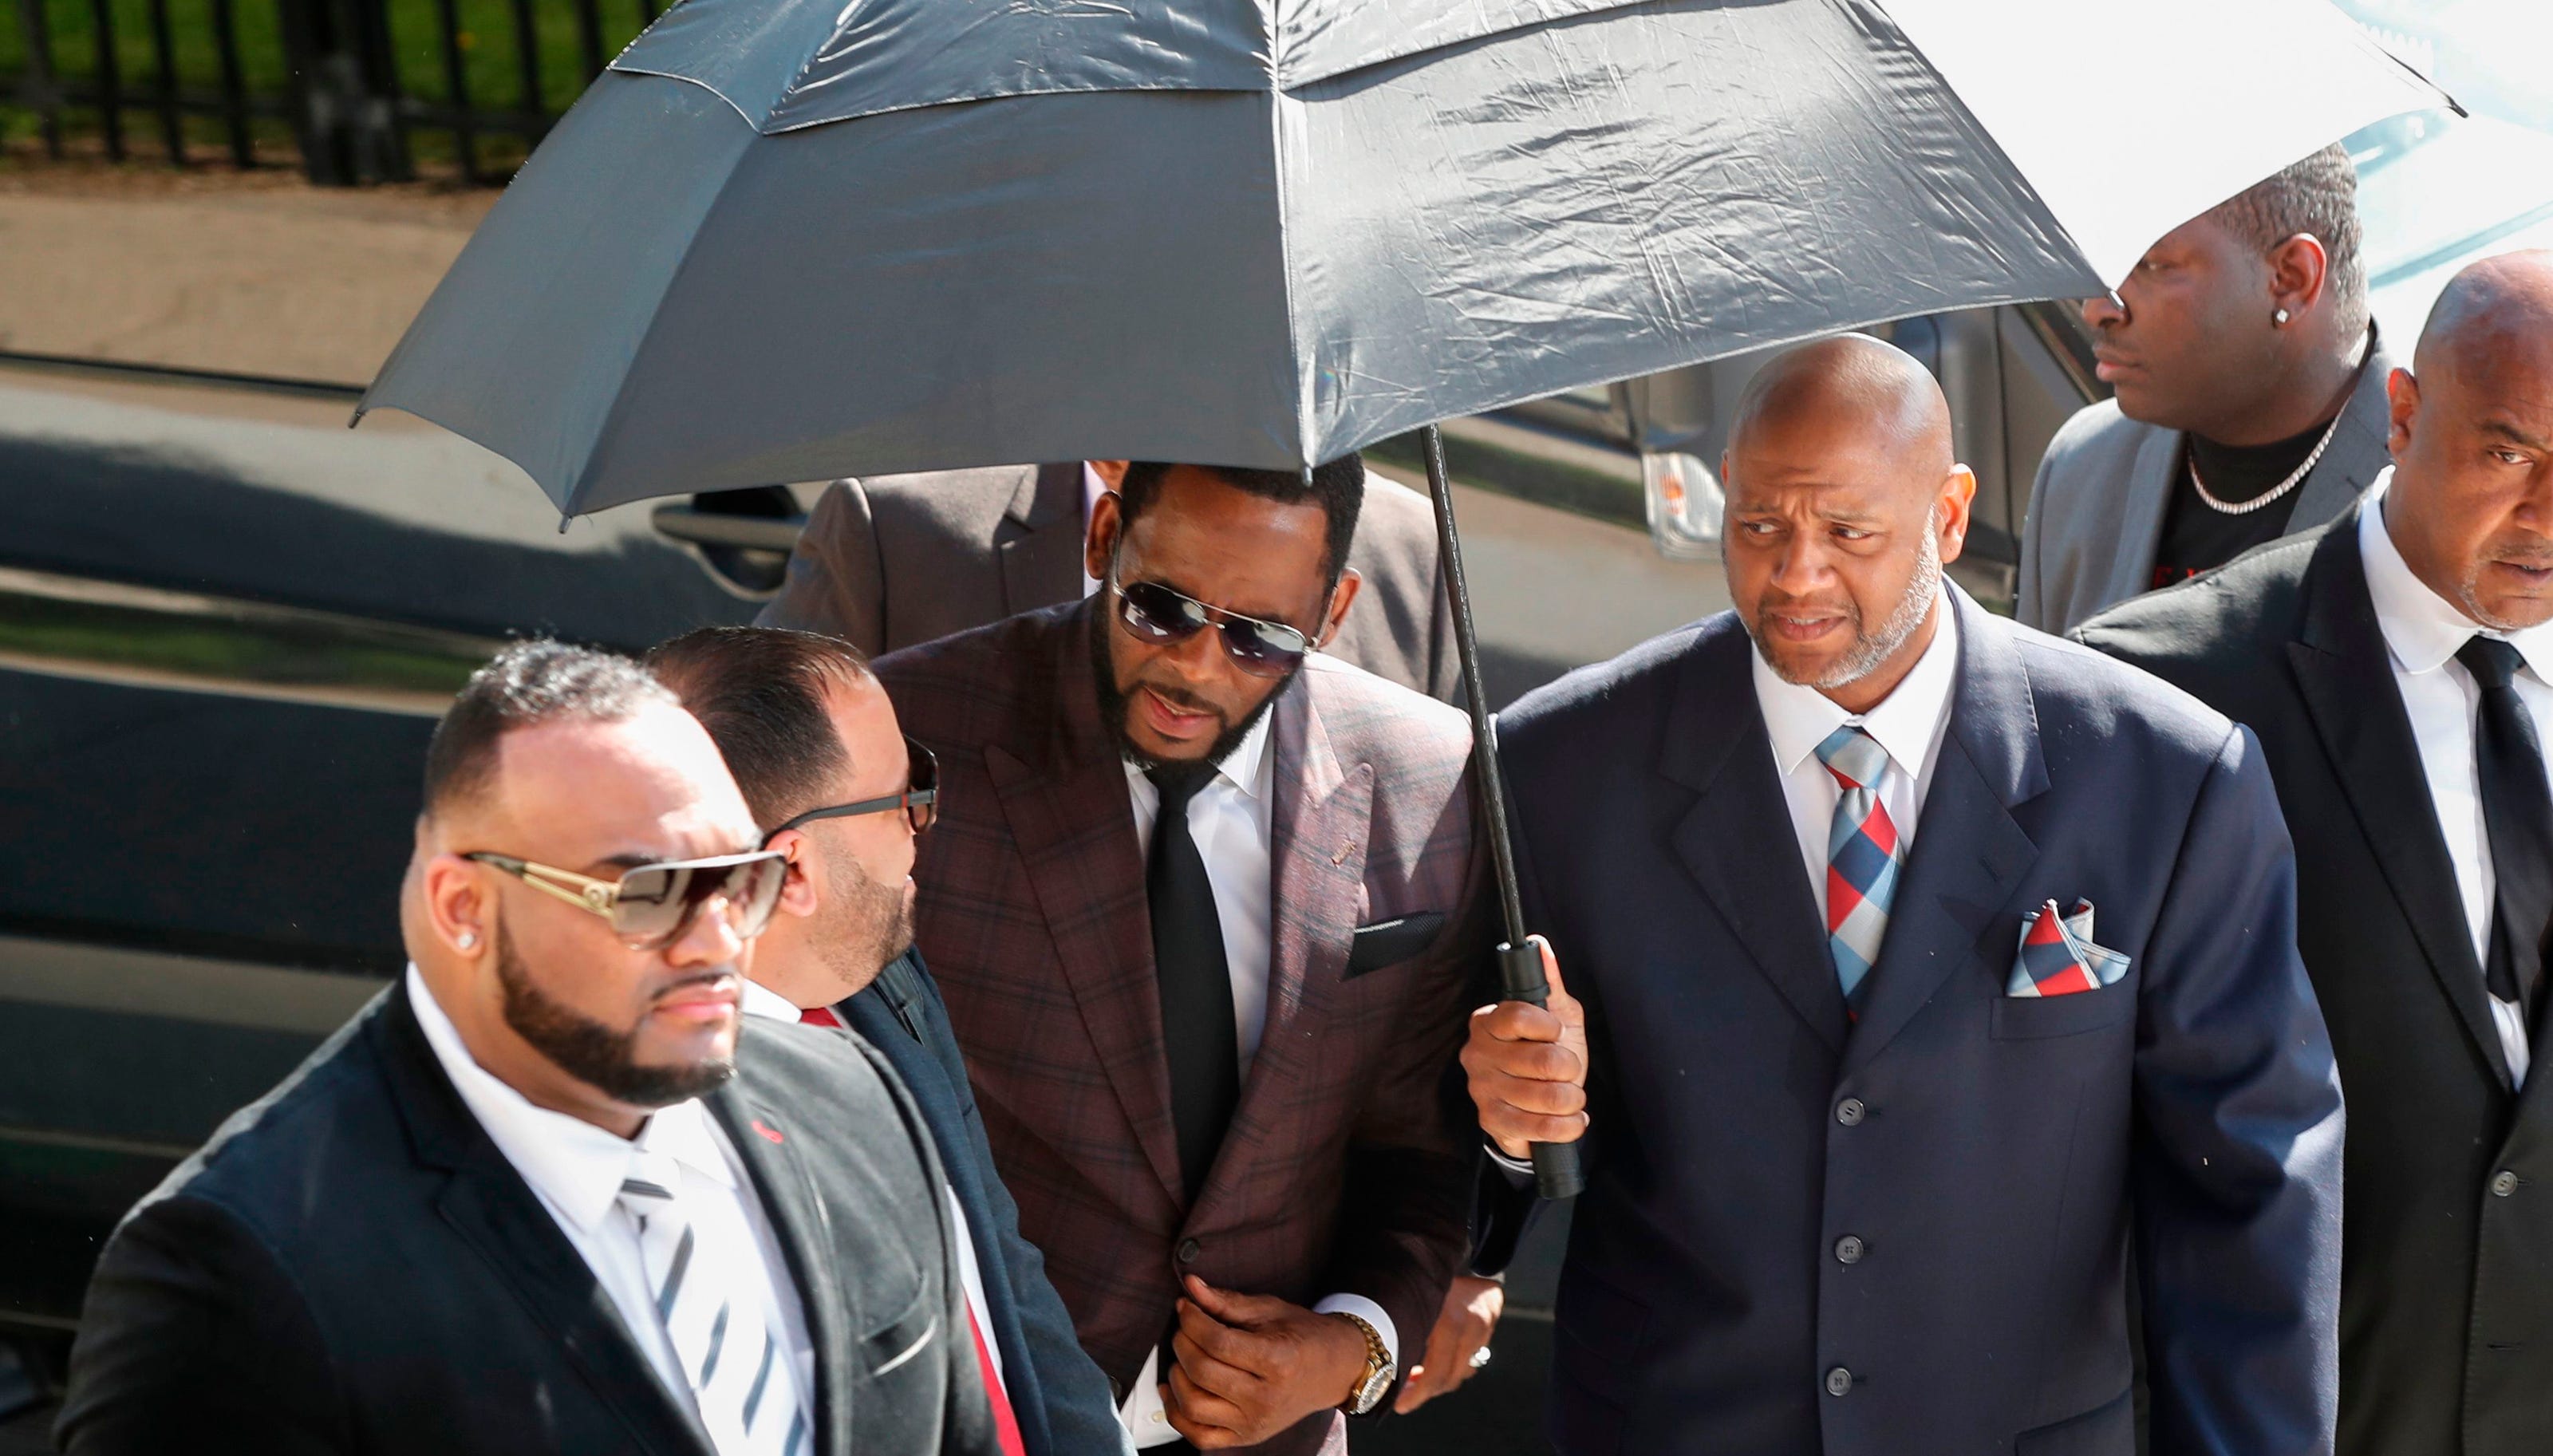 R Kelly In Court Randb Singer S Latest Hearing On Sex Crimes Case Free Nude Porn Photos